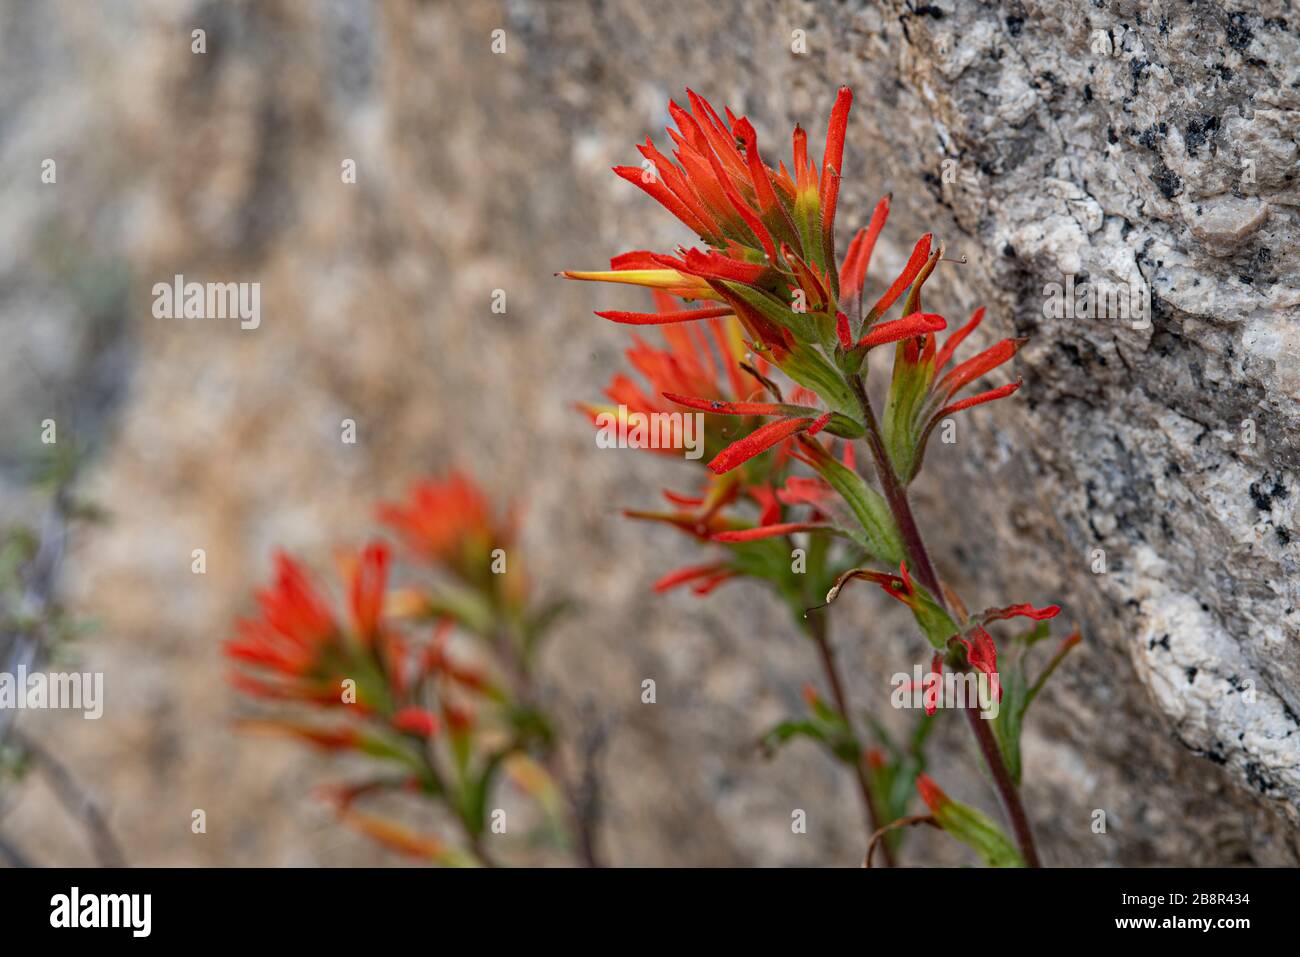 Indian paintbrush grows at elevation along the rocky trails in Sequoia National Park. Stock Photo